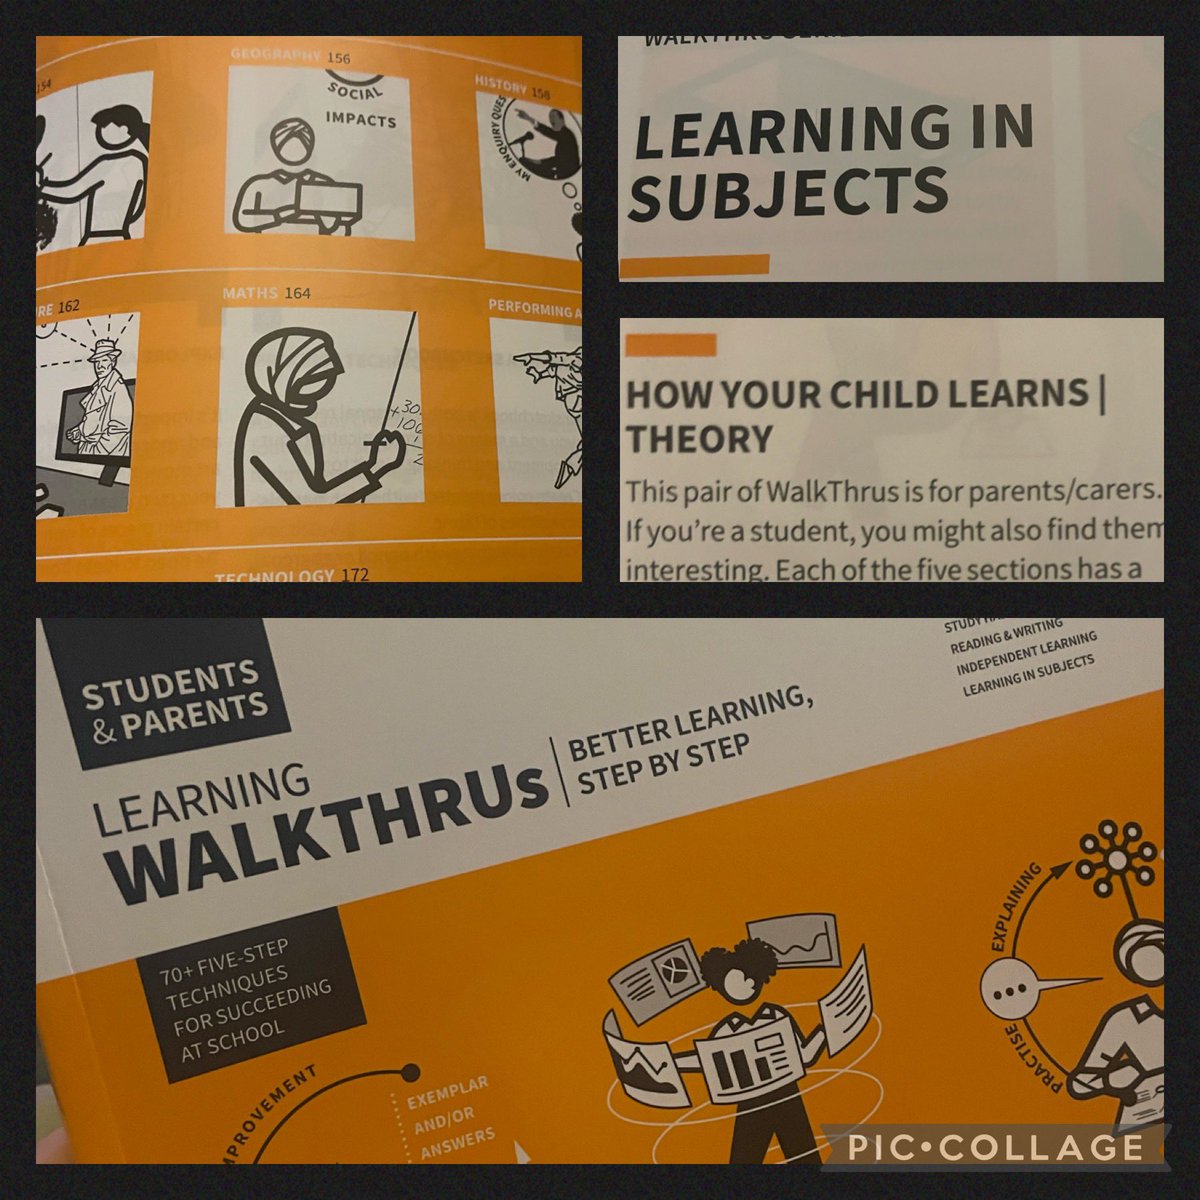 Really pleased that the new #learningwalkthrus book from @teacherhead and @olicav landed on my doorstep this evening. The learning through subjects section is really interesting!